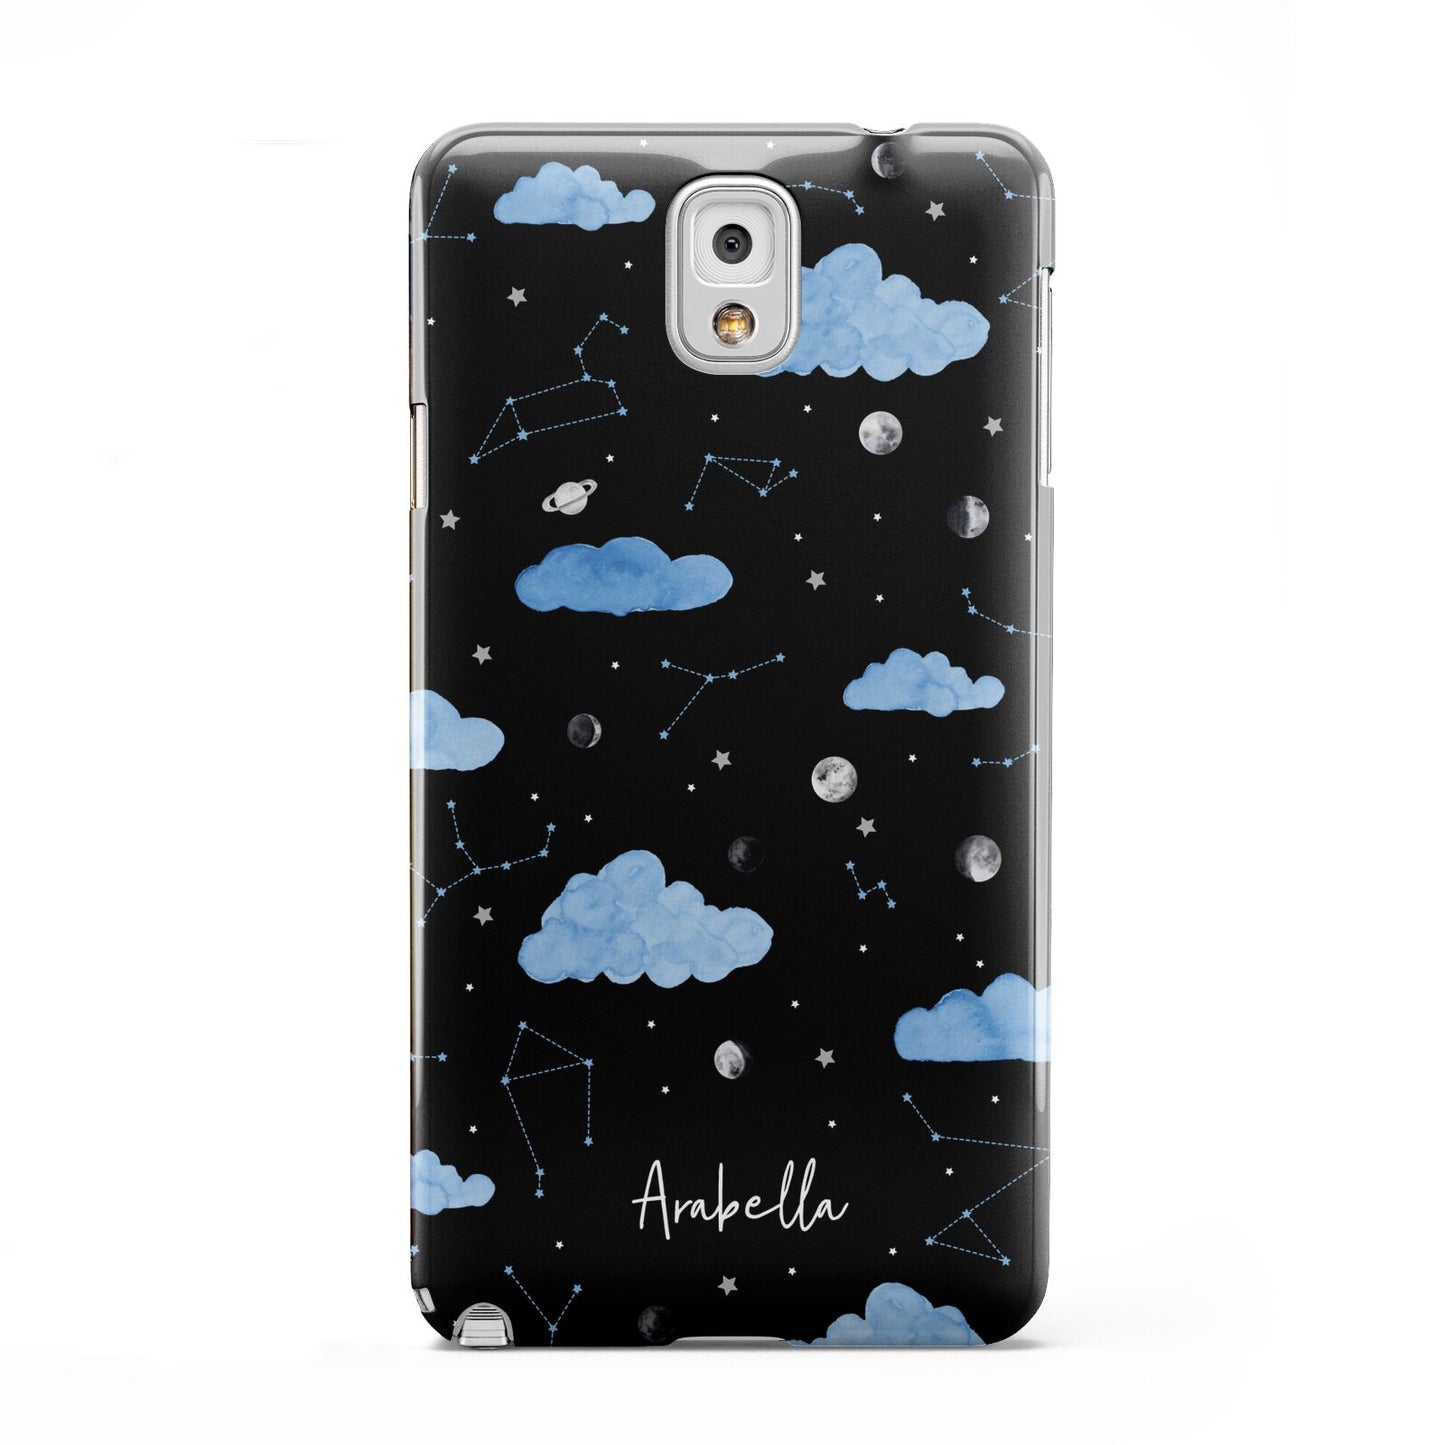 Cloudy Night Sky with Name Samsung Galaxy Note 3 Case